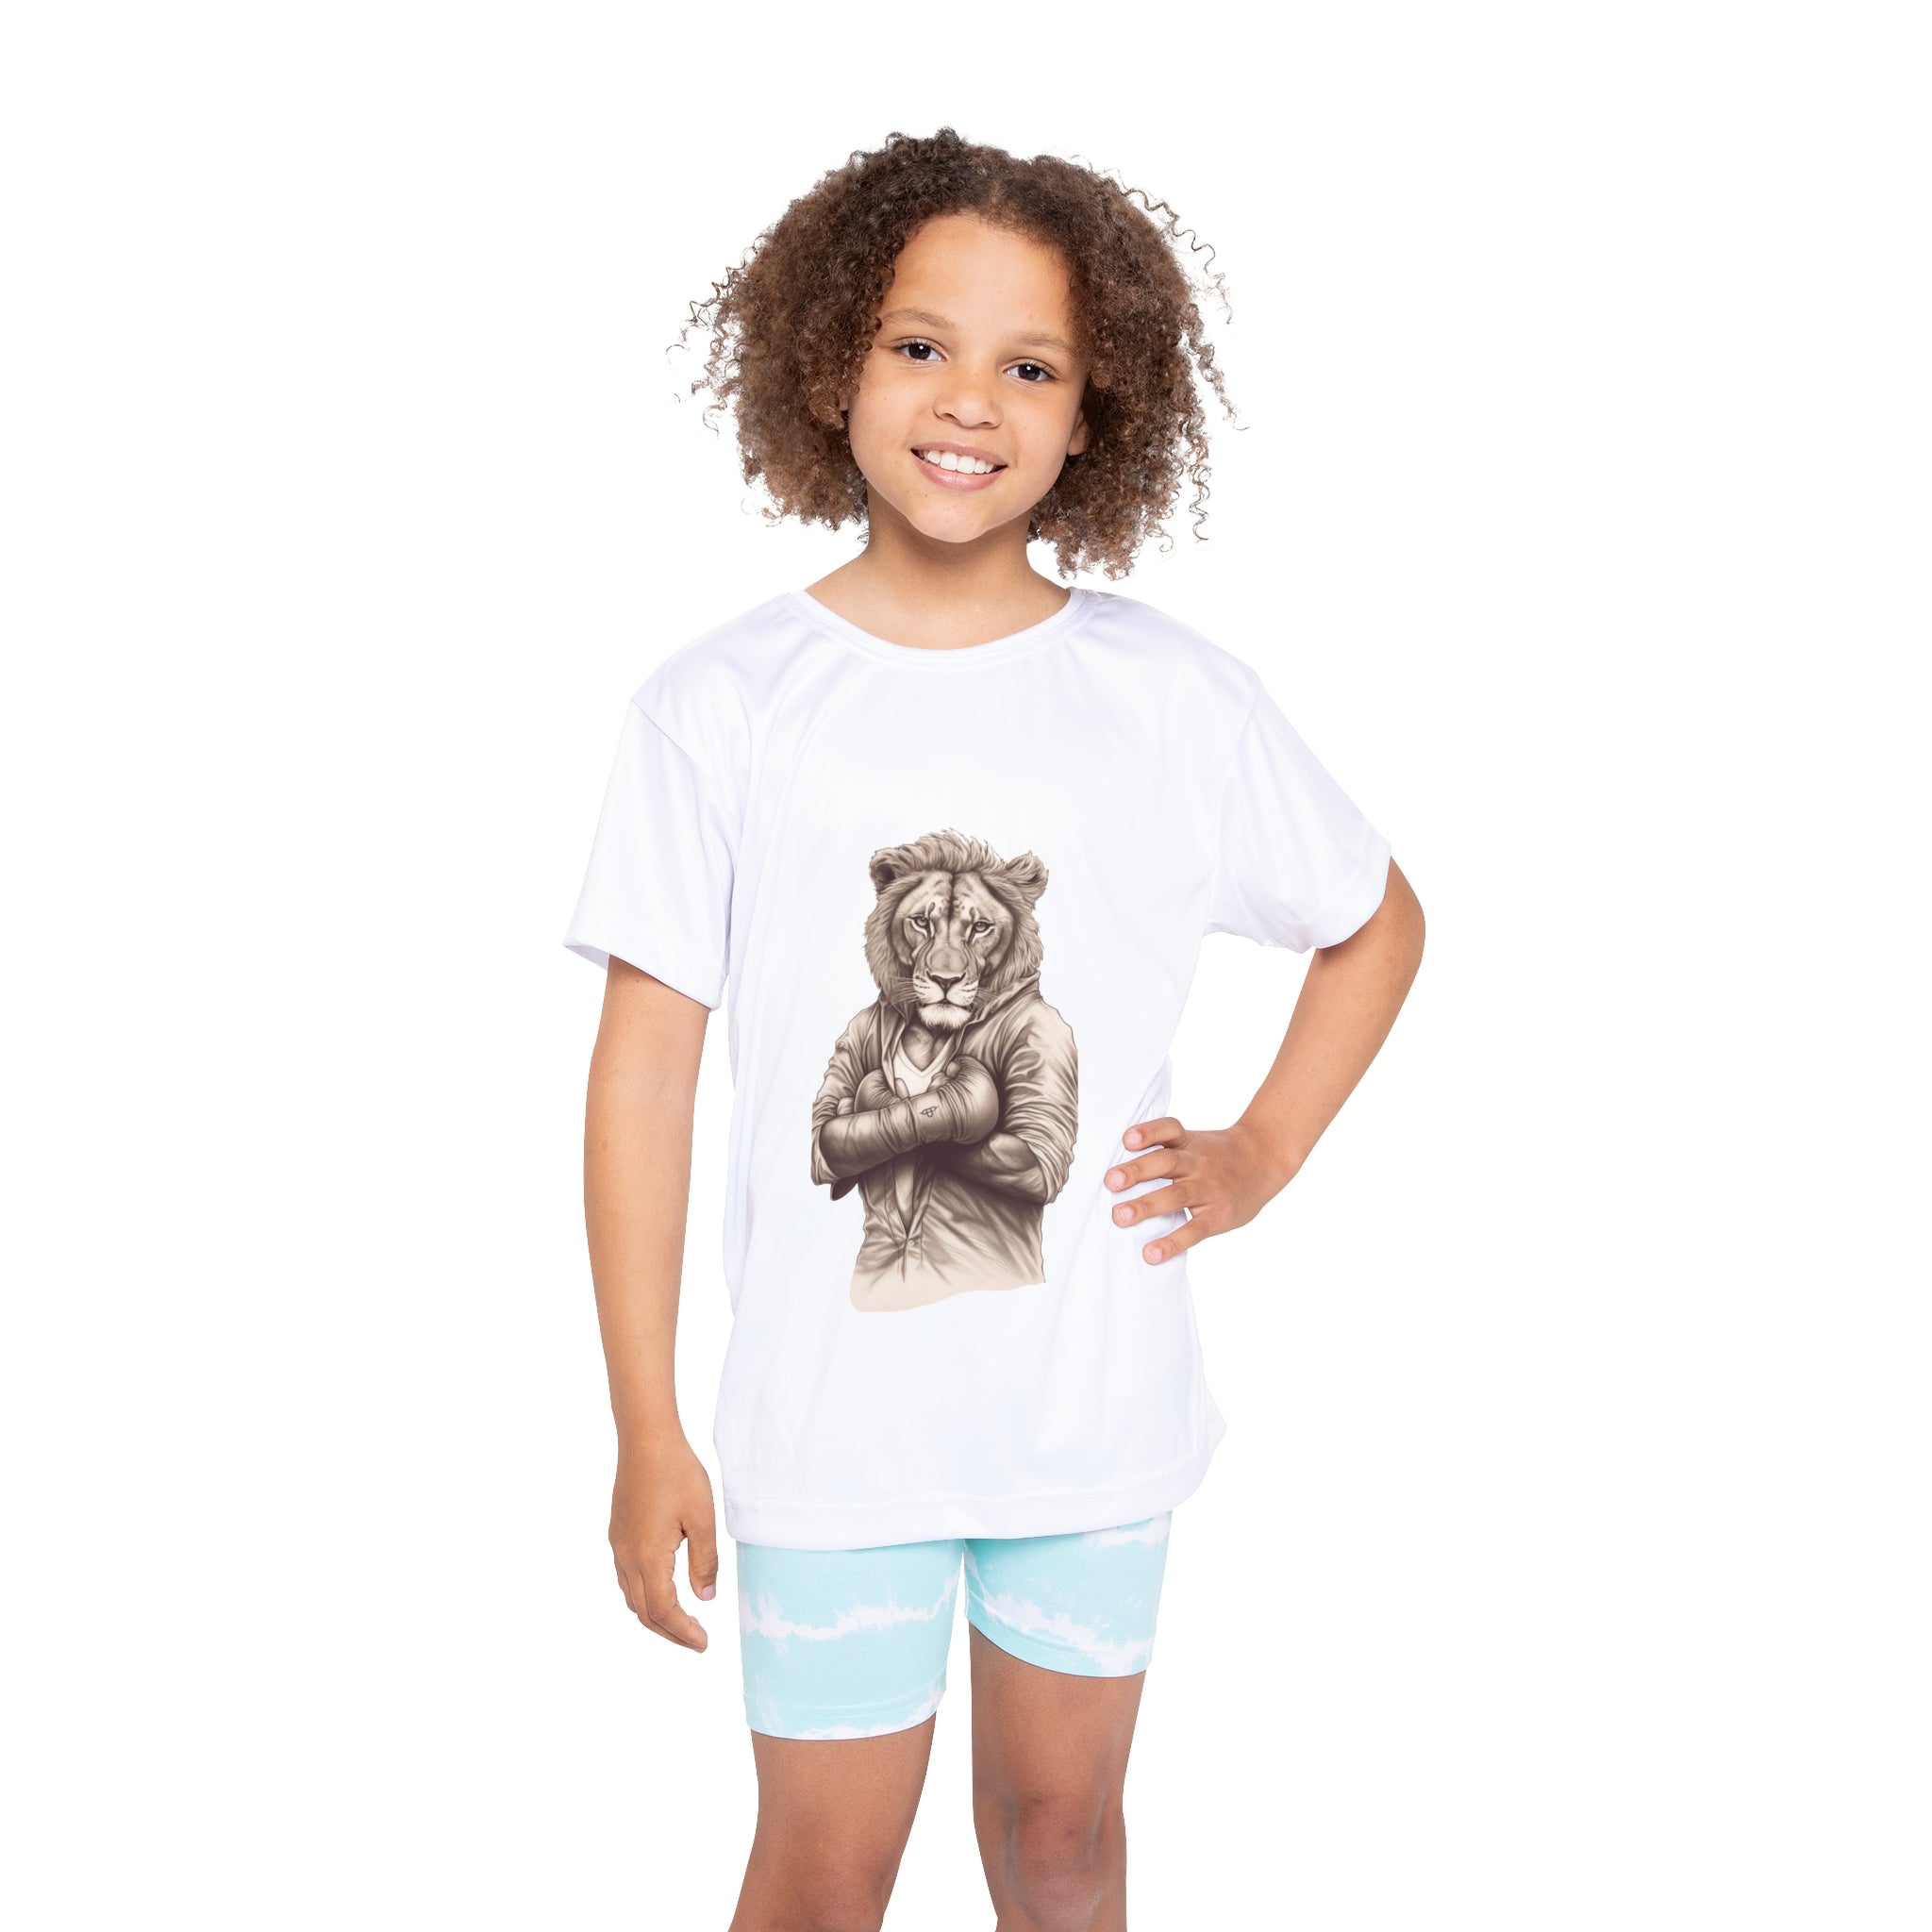 Boxing Fan Lion Sketch Art Birthday Kid Gift Athletic T-Shirt for Young Boxers Sports Shirt for Kids Activities Gift